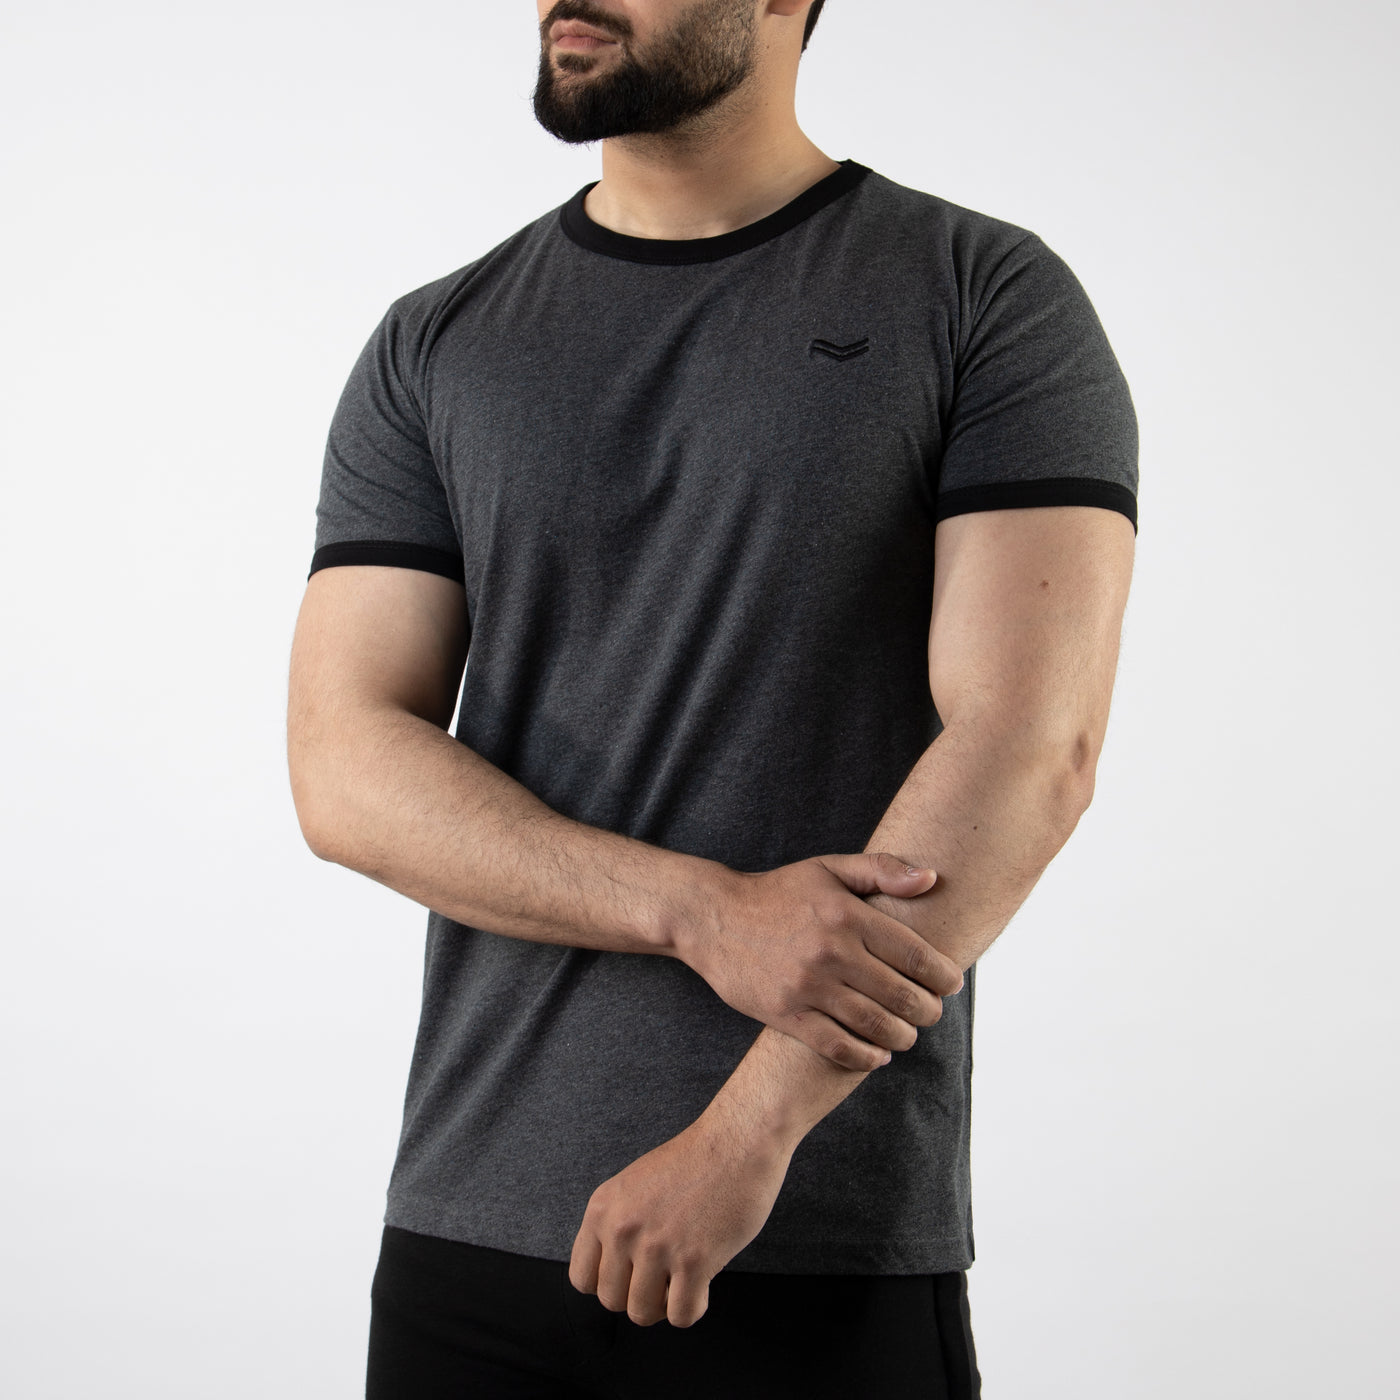 Textured Charcoal Ringer T-Shirt